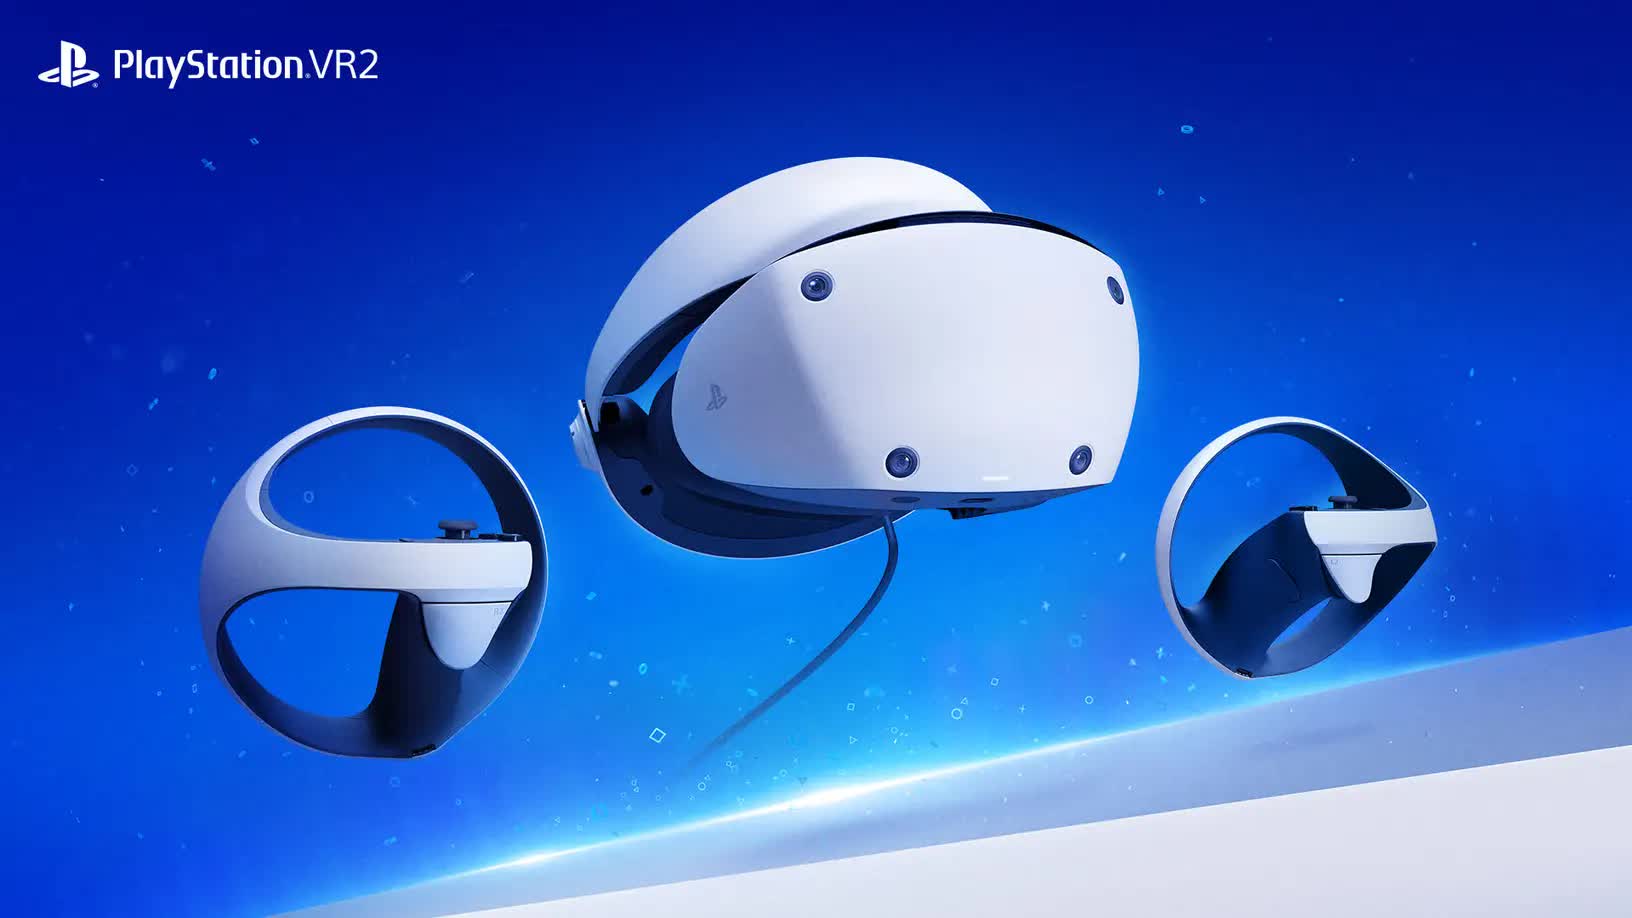 Sony may be forced to lower PSVR 2's price after slow launch